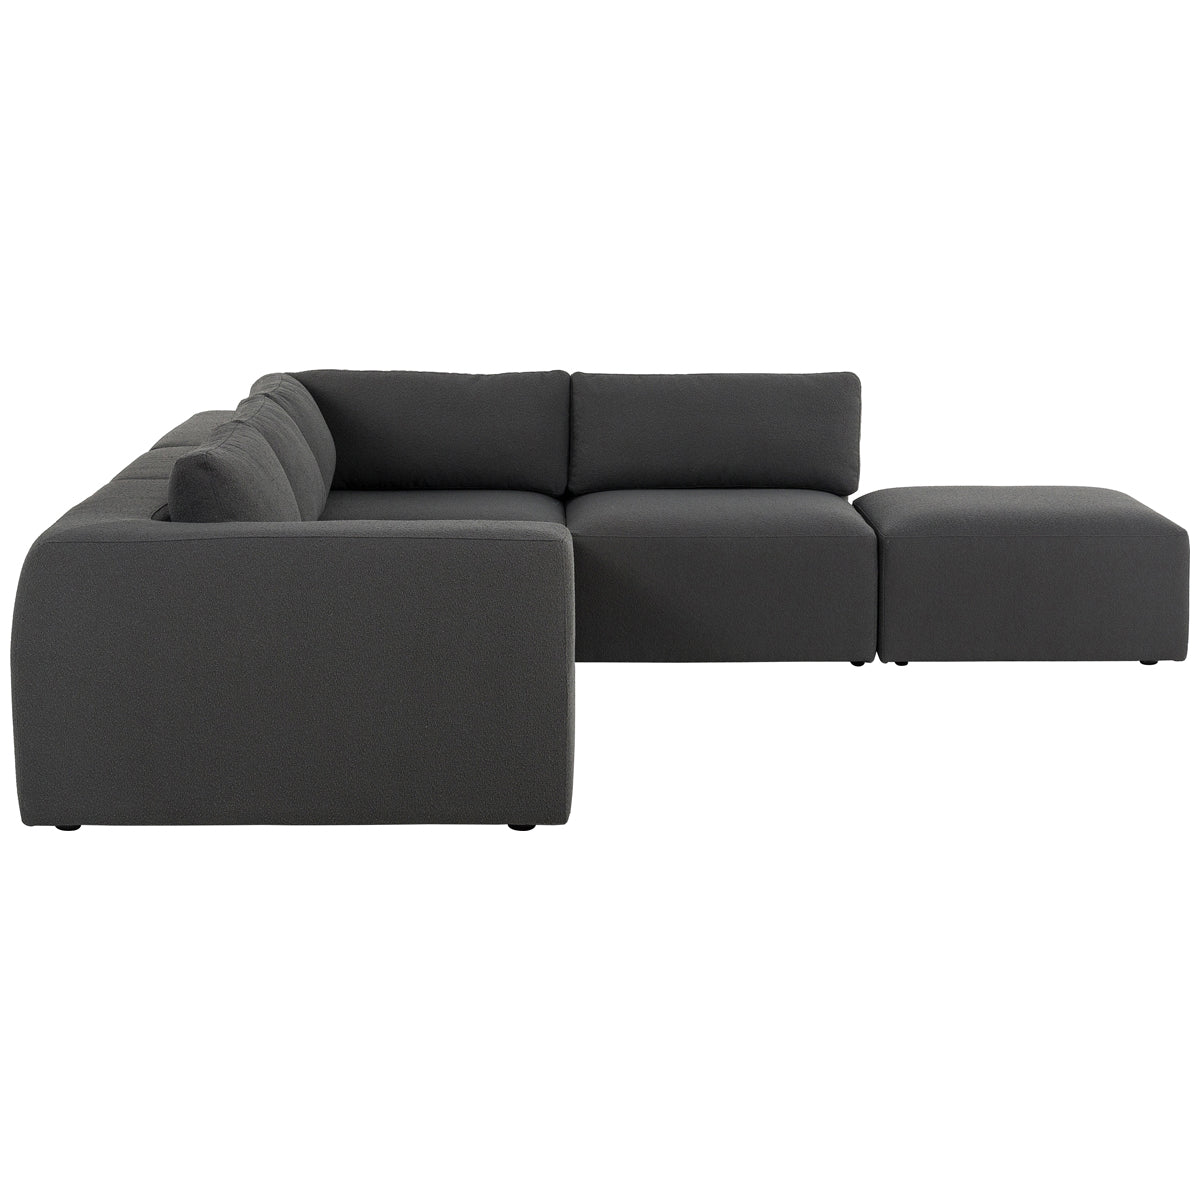 Four Hands Kensington Brylee Fiqa 4-Piece Sectional with Ottoman